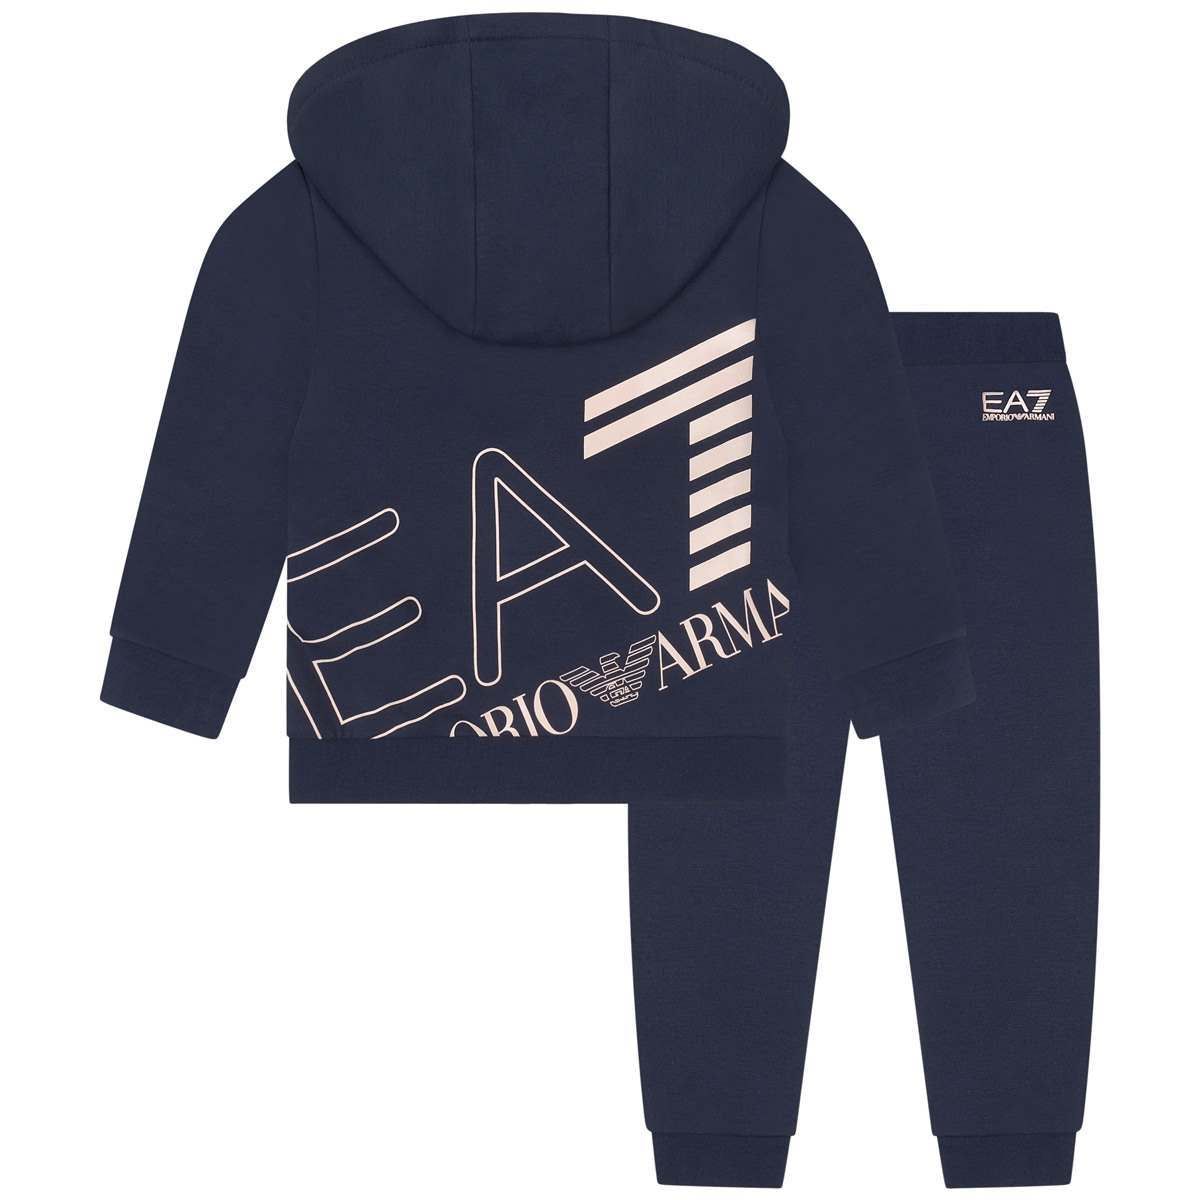 EA7 Emporio Armani Girls Navy Branded Tracksuit 
                
                
                Made in Thailand